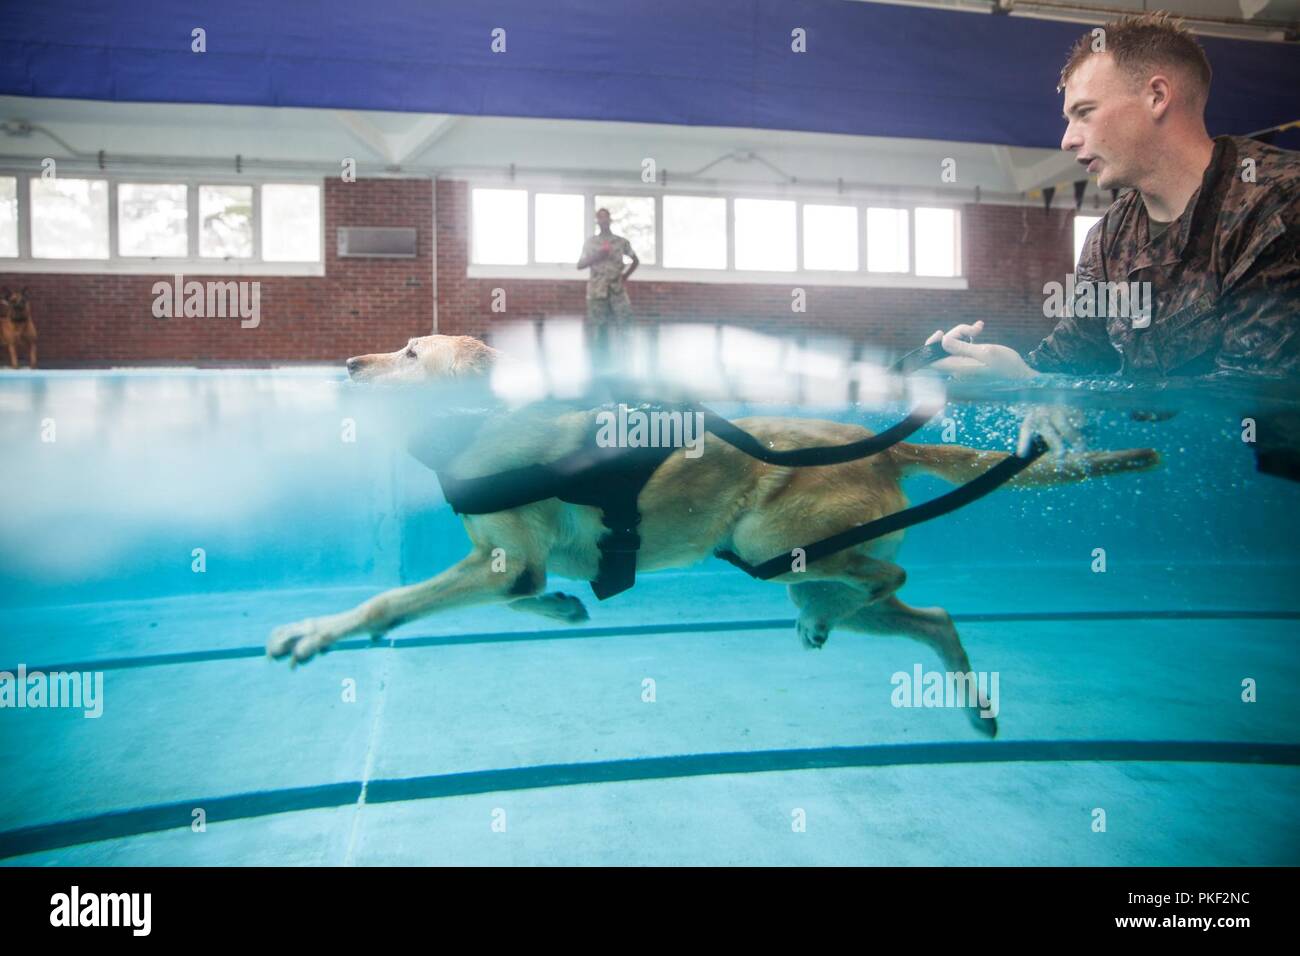 Sergeant Joseph Adams, a 2nd Law Enforcement Battalion military working dog-handler, shouts commands at his dog, Gunner, as they swim in the Area 5 pool at Marine Corps Base Camp Lejeune, N.C., Aug. 3, 2018. 2nd LEB practiced aggression training as part of specialized training to familiarize their dogs with water. The 2nd LEB military working dogs benefit from this particular type of training due to not being exposed to water tactics during initial training periods and become better accustomed to performing duties in atypical situations. Stock Photo